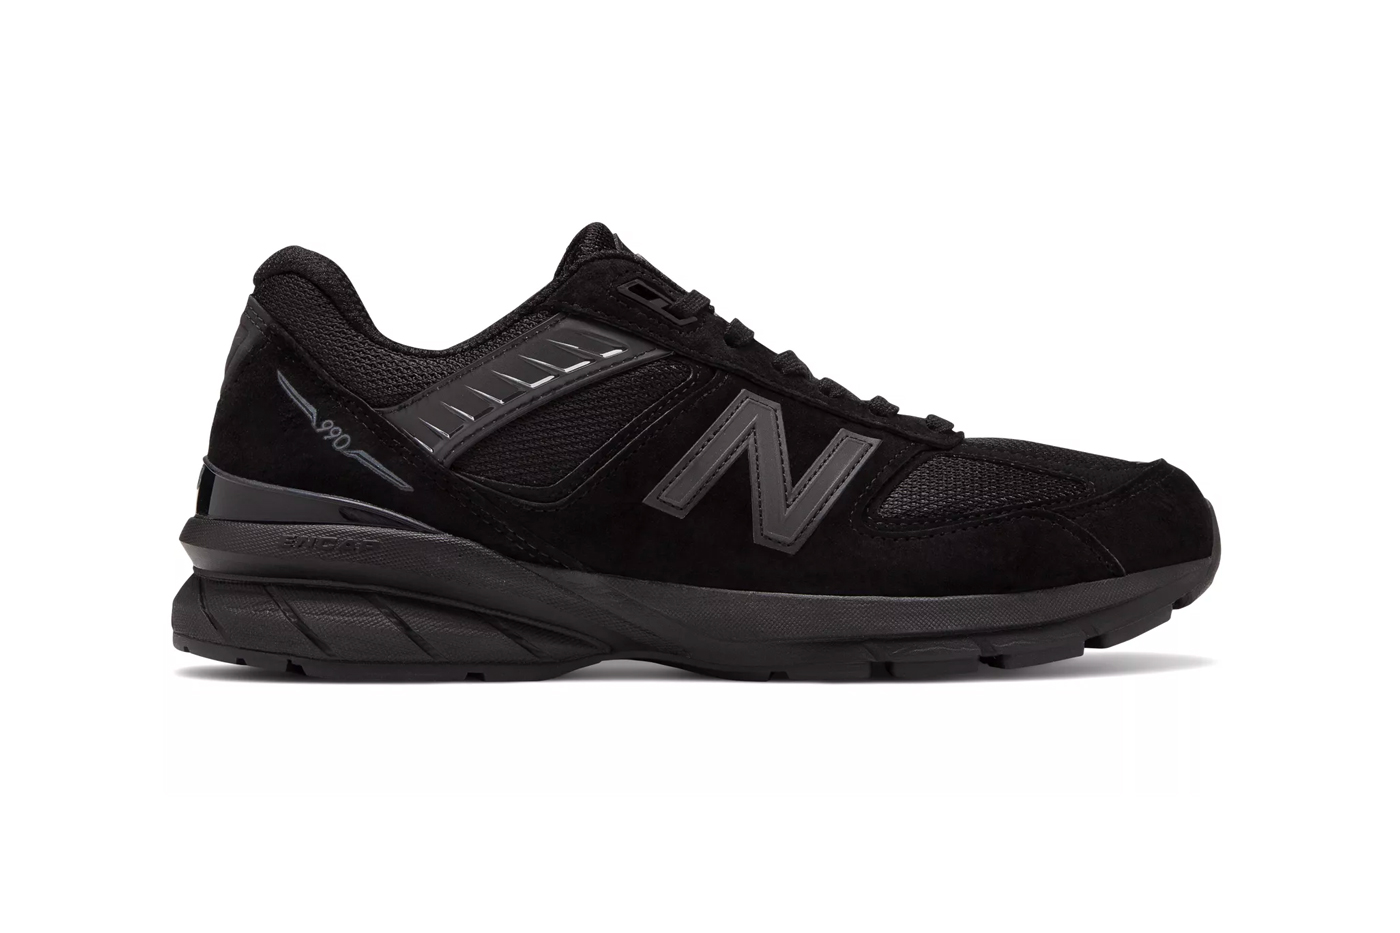 New Balance Made in USA 990v5 Black Encap midsole ortholite cushion technology hand crafted 75 years factory maine footwear sneakers suede mesh rubber